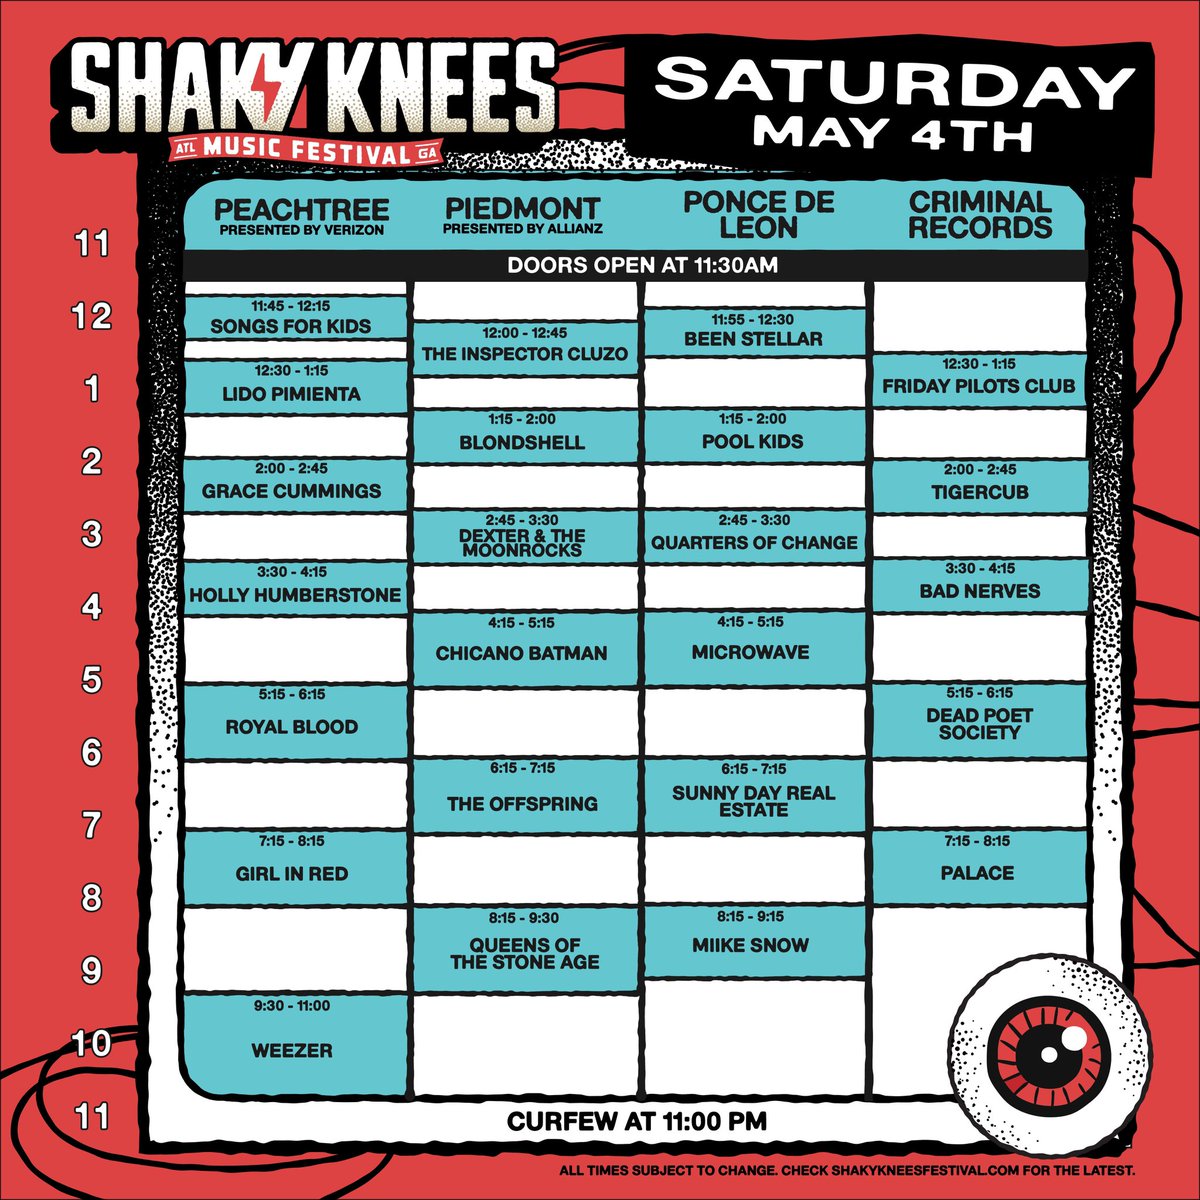 It's all happening down south at @ShakyKneesFest in Atlanta next weekend! We're playing the Peachtree Stage on Saturday at 9:30pm 🤘🏼 Who's hanging? shakykneesfestival.com/tickets